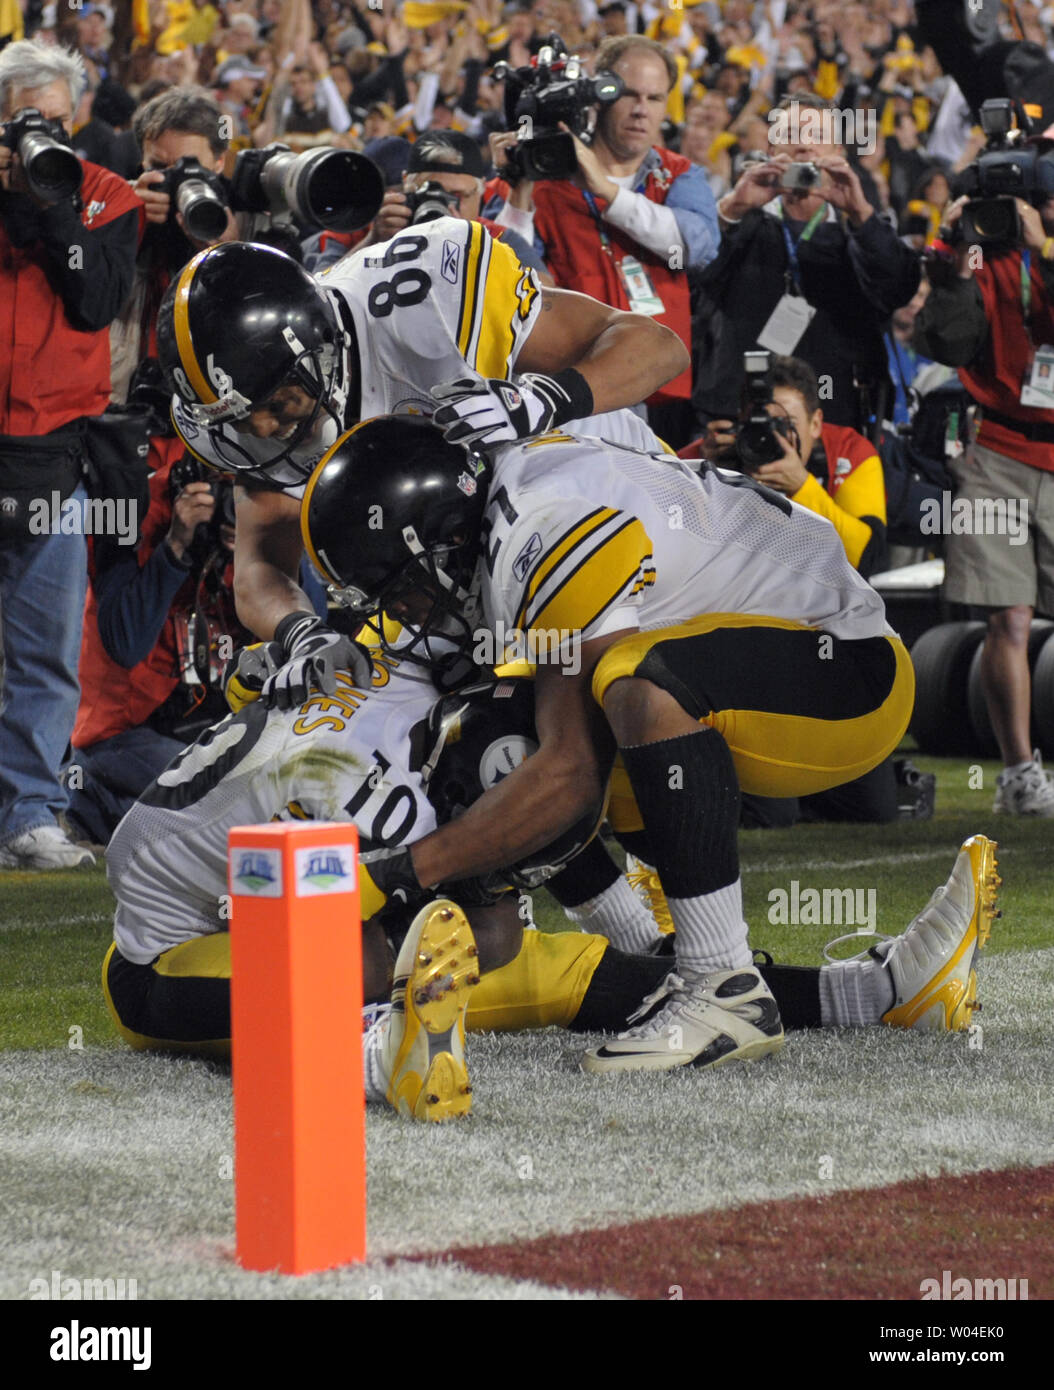 Pittsburgh Steelers Hines Ward (top) and Mewelde Moore celebrate with wide receiver Santonio Holmes after he pulled in the game-winning touchdown reception against the Arizona Cardinals in the fourth quarter at Super Bowl XLIII at Raymond James Stadium in Tampa, Florida, on February 1, 2009. The Steelers defeated the Cardinals 27-23.   (UPI Photo/Kevin Dietsch) Stock Photo